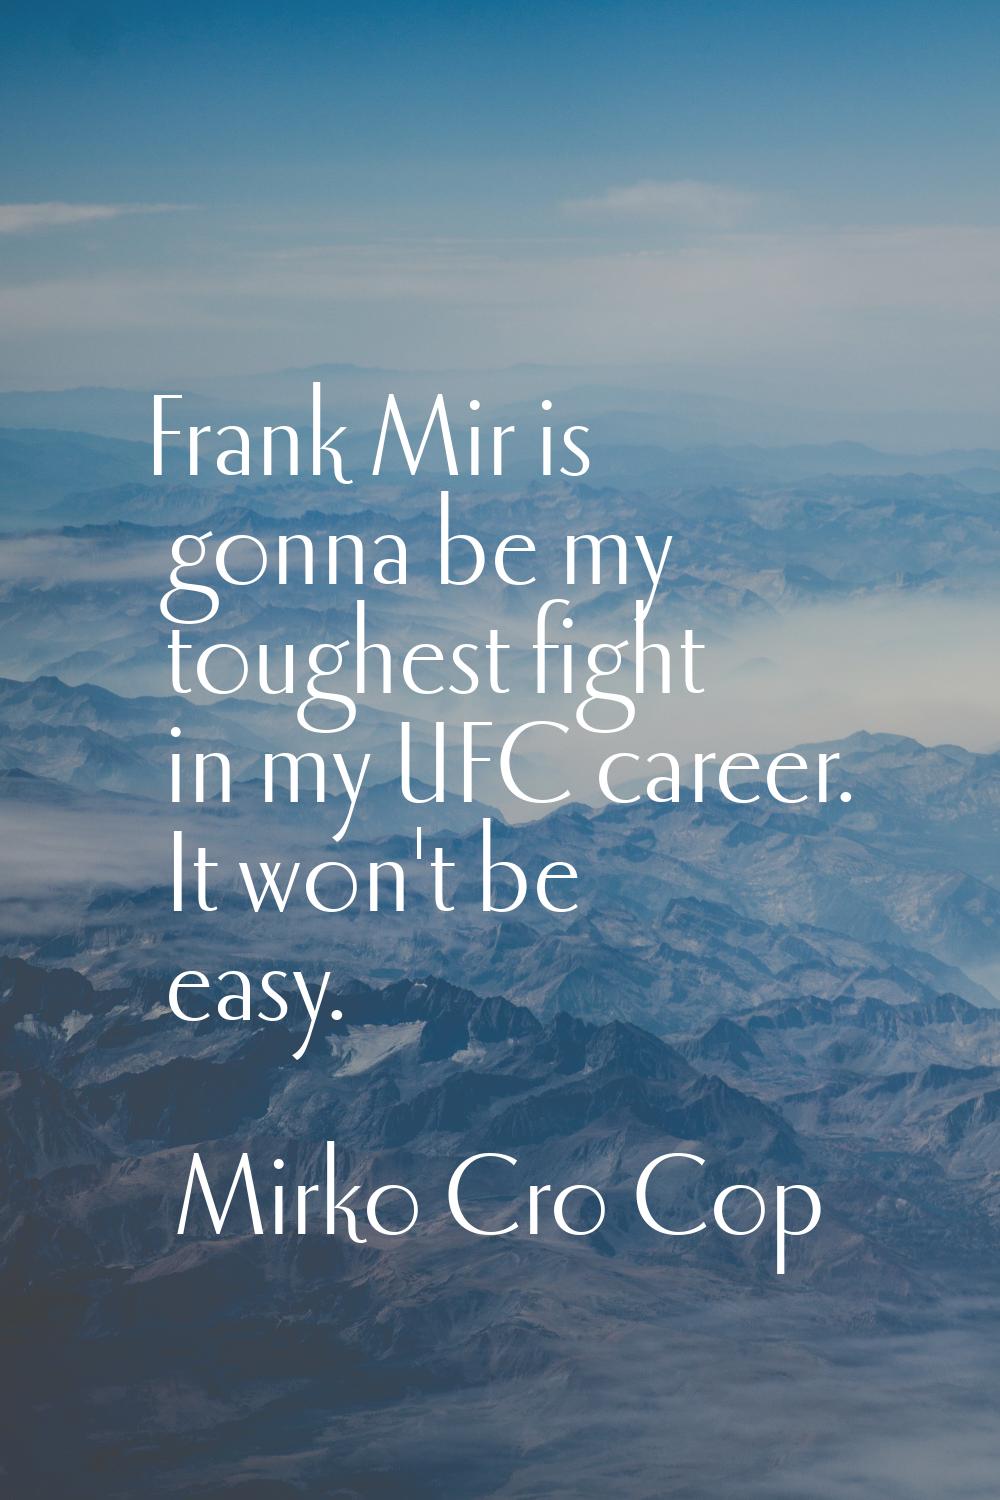 Frank Mir is gonna be my toughest fight in my UFC career. It won't be easy.